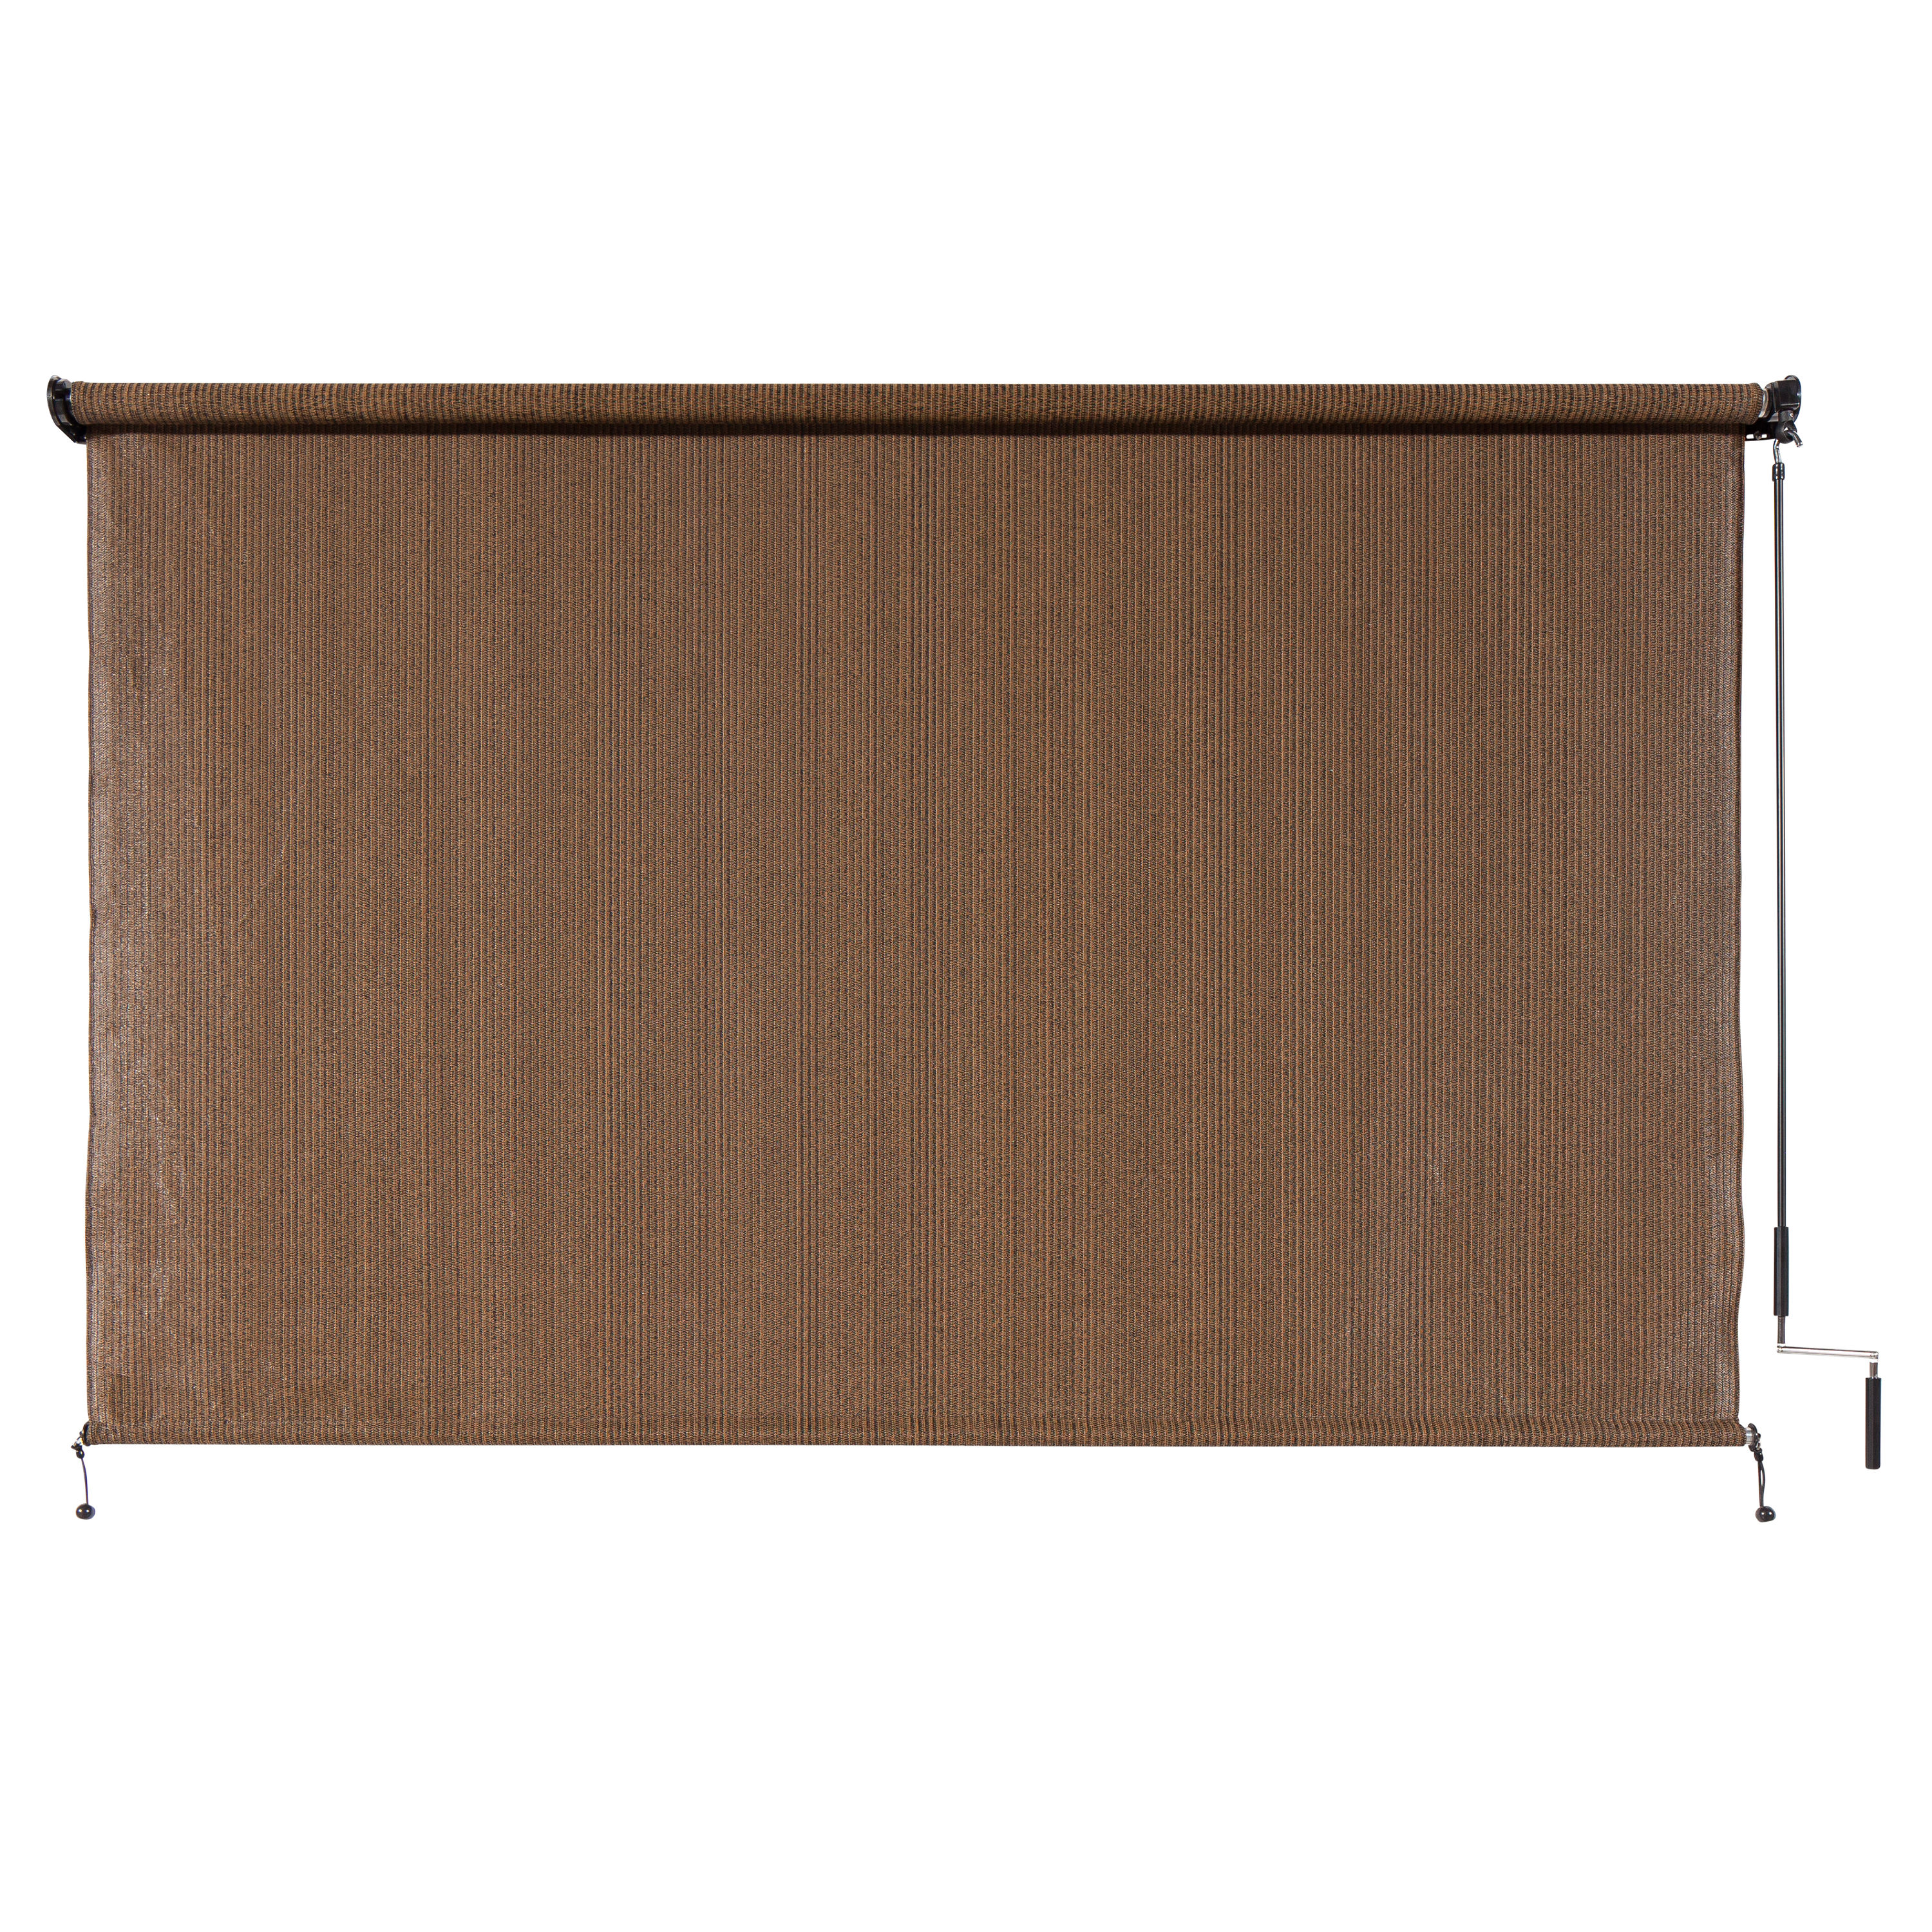 Cordless Roller Shade with 90% UV Protection Southern Sunset Coolaroo Exterior Roller Shade No Valance, 4 X 6 